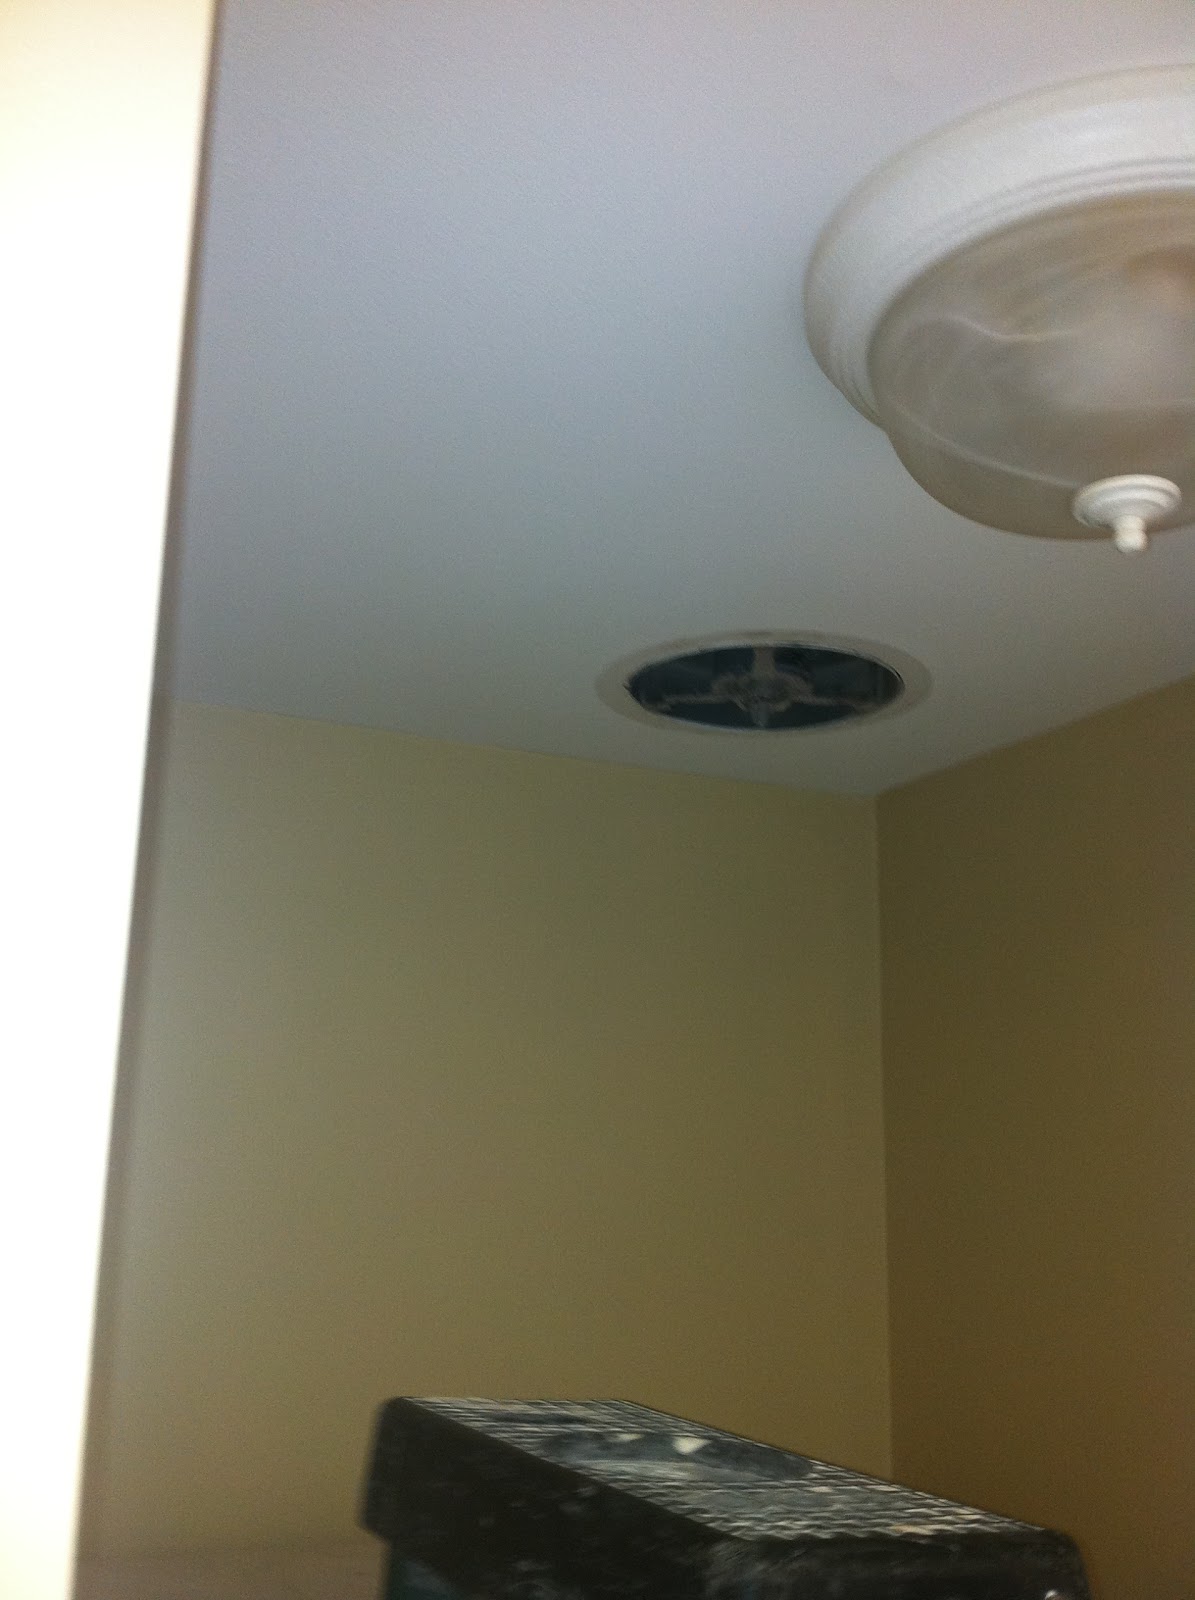 LOW PROFILE BATHROOM FAN - COMPARE PRICES, REVIEWS AND BUY AT